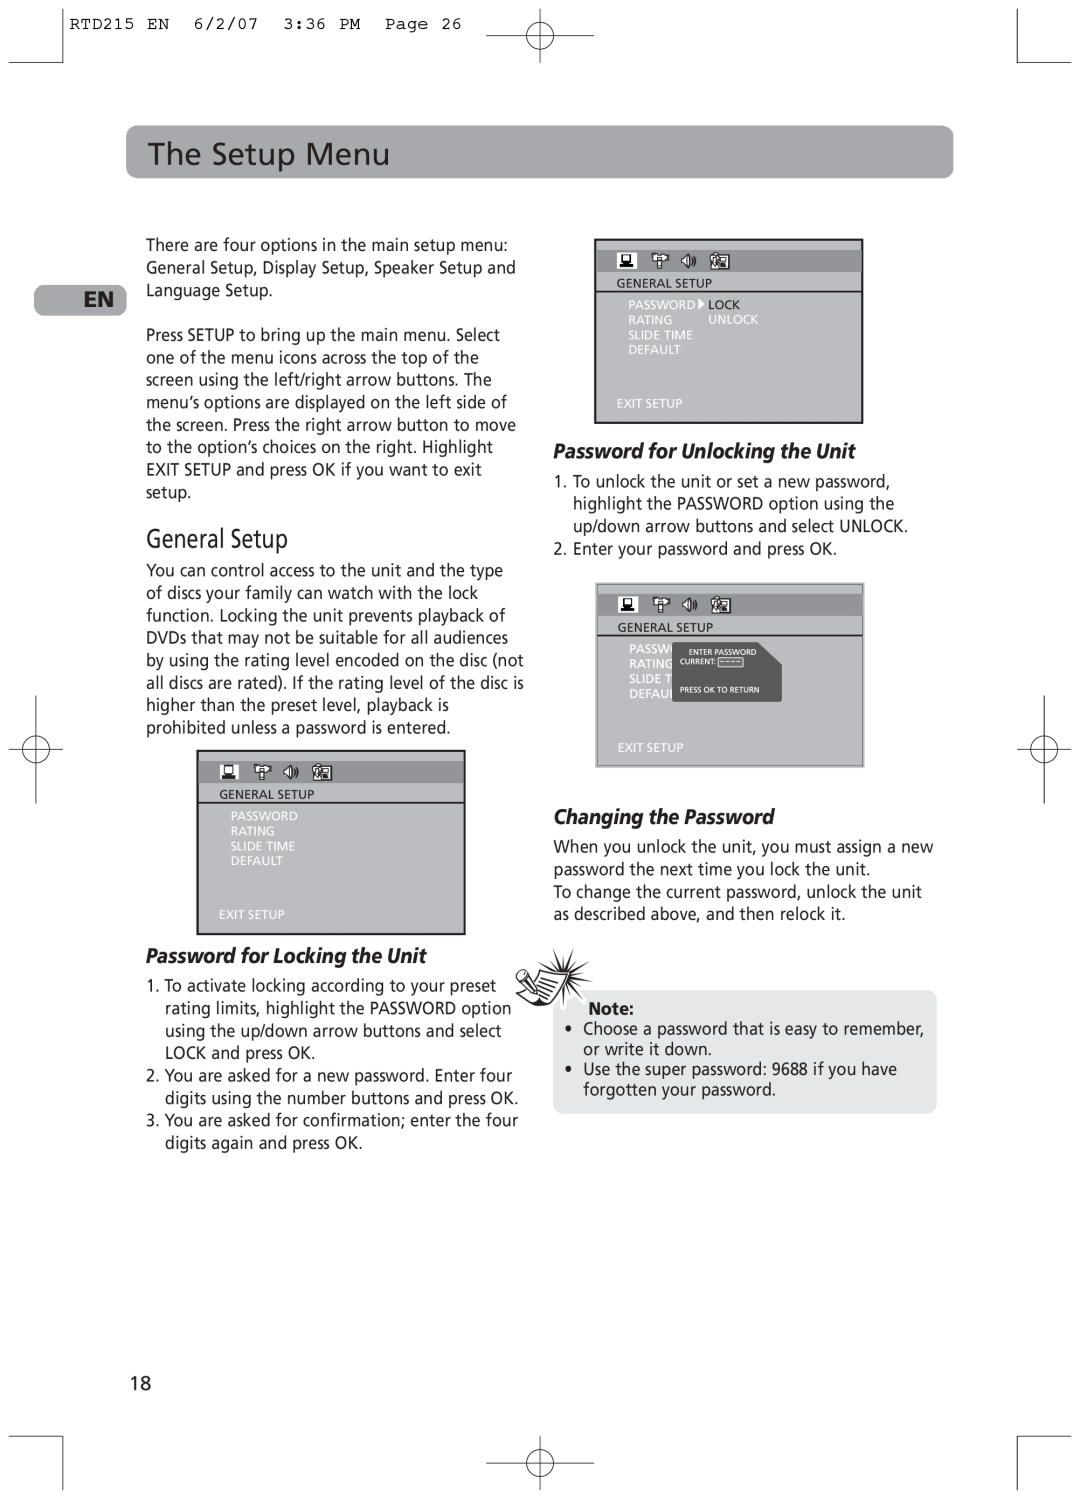 RCA RTD215 user manual The Setup Menu, General Setup, Password for Unlocking the Unit, Changing the Password 